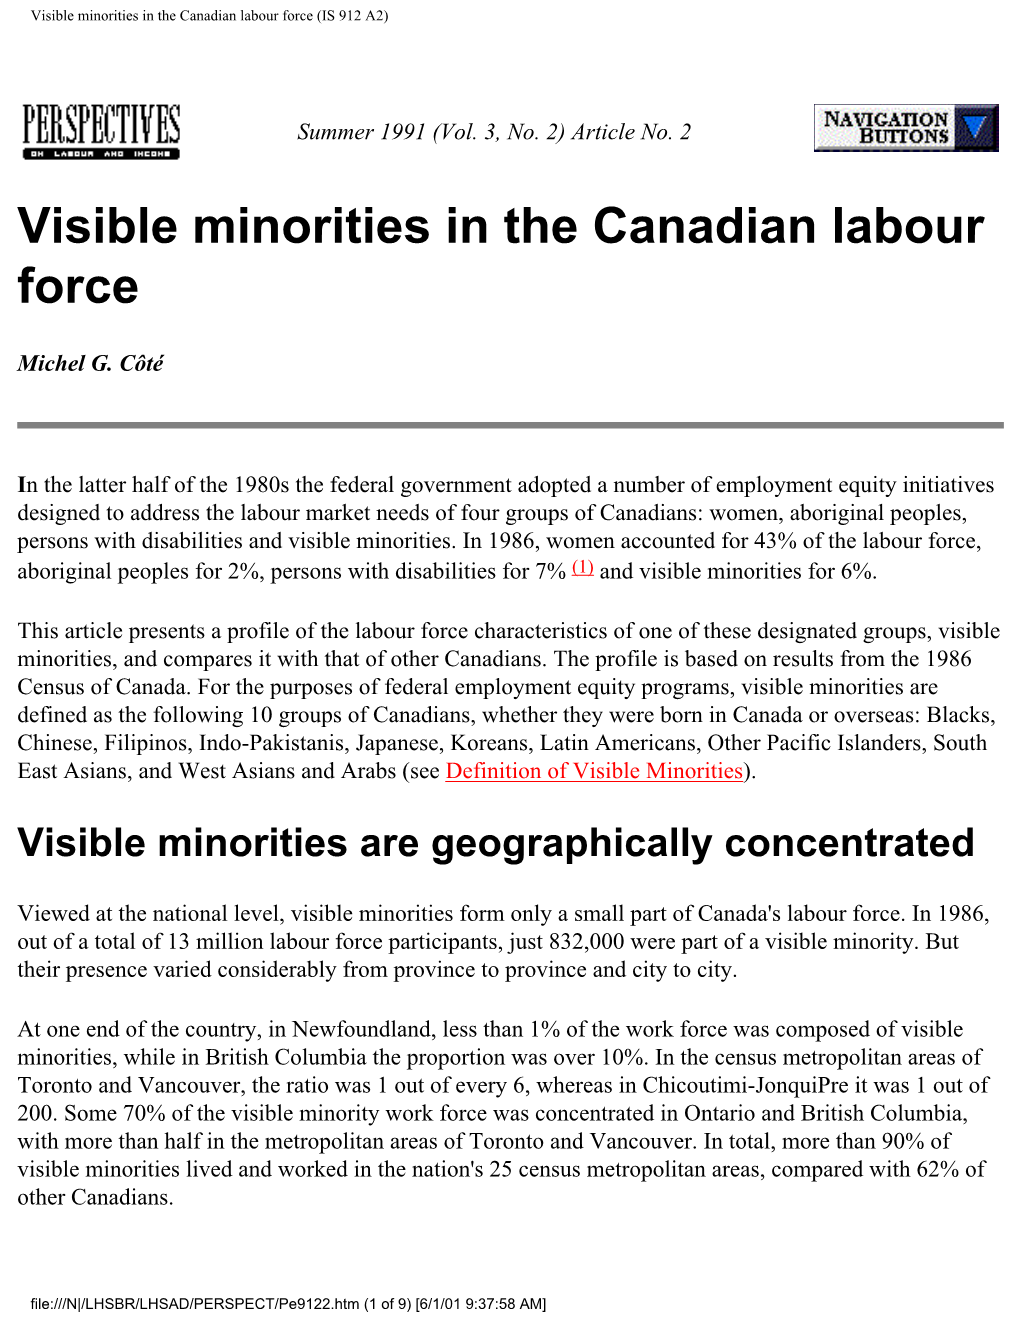 Visible Minorities in the Canadian Labour Force (IS 912 A2)